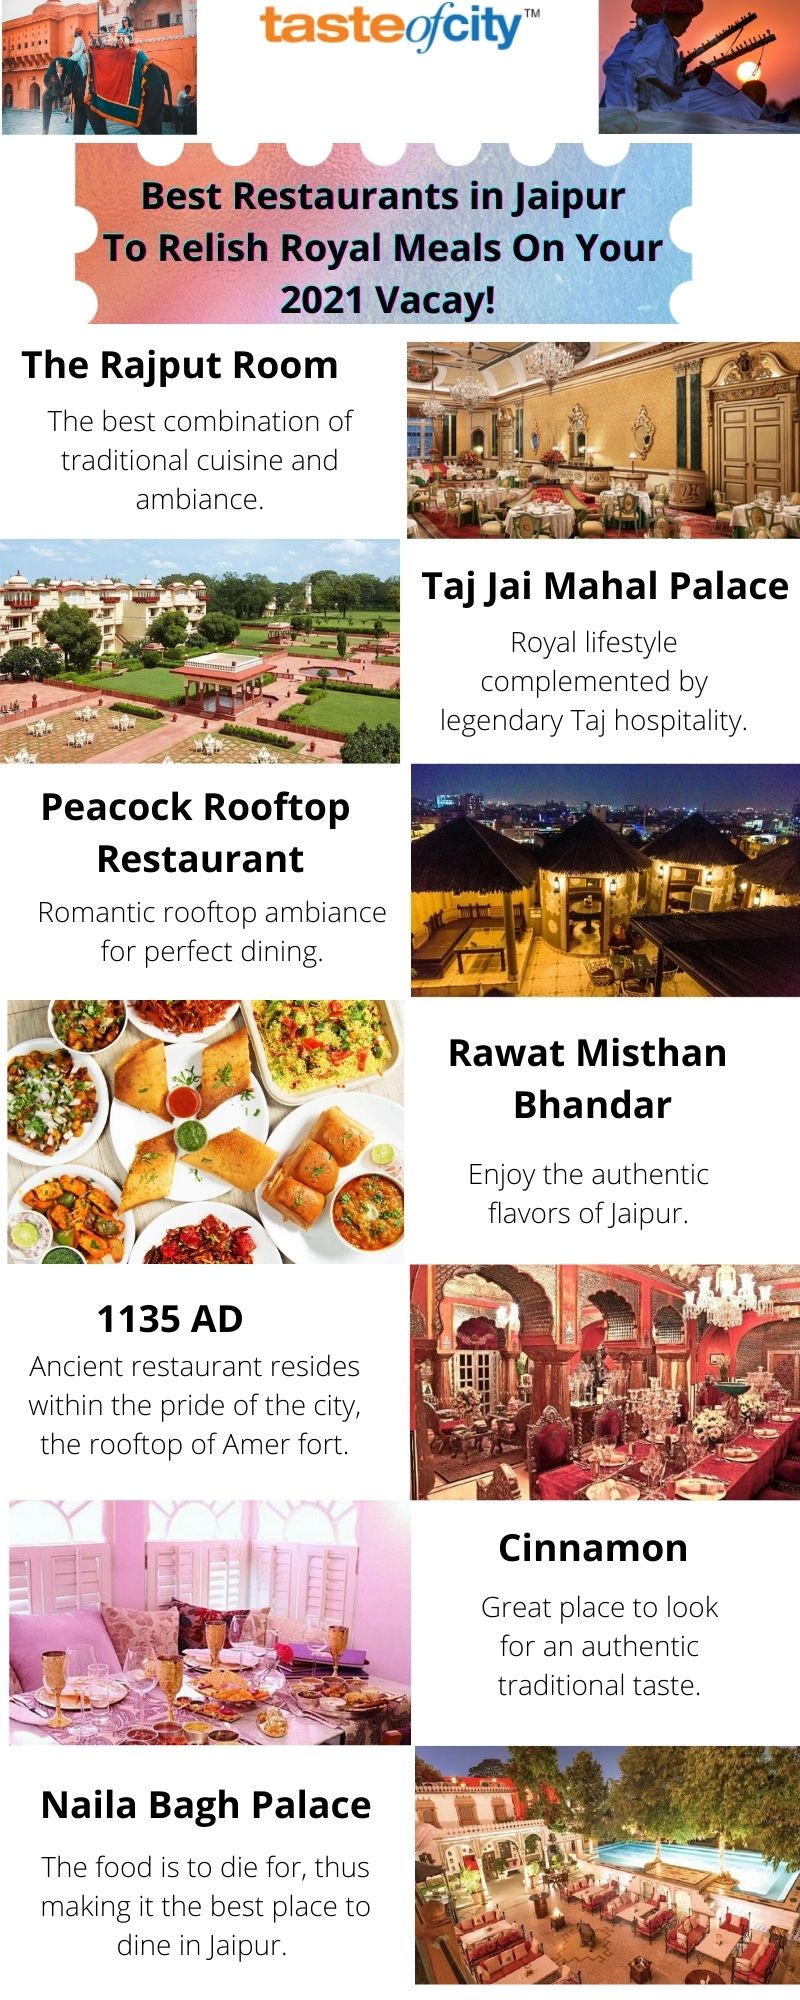 Best Restaurants In Jaipur To Relish Royal Meals On Your 2021 Vacay!.jpg  by tasteofcity